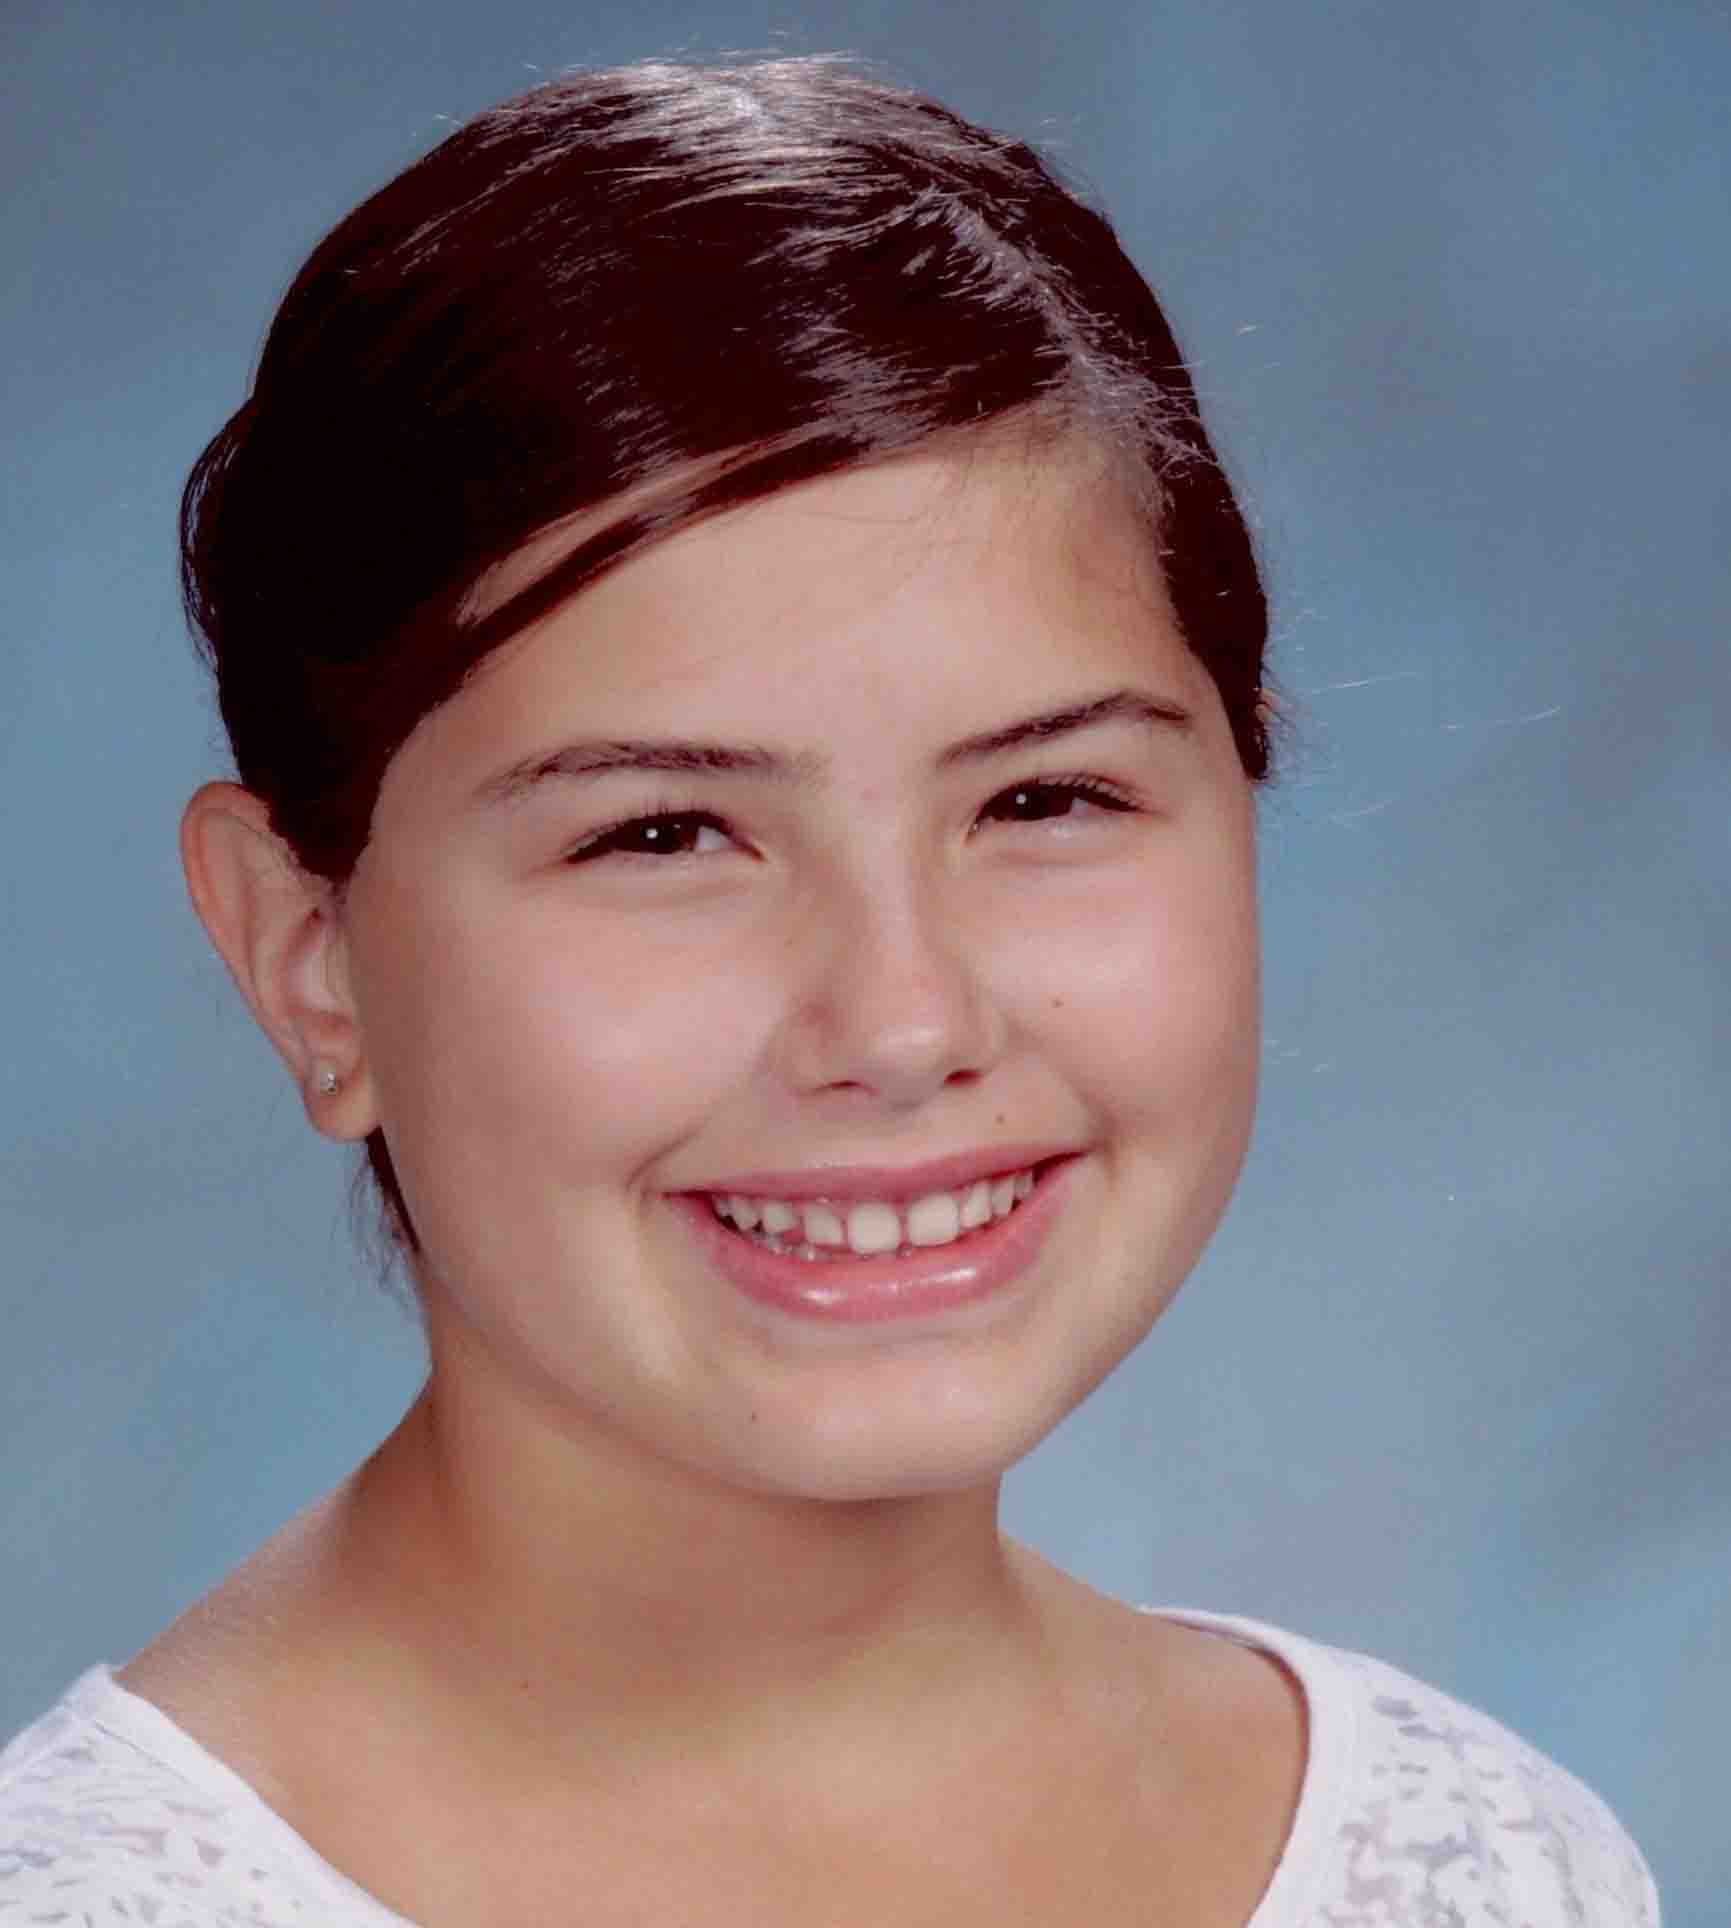 7th Grader <b>Anna Moss</b> Is A Donor To the Triunfo Y - 11801031-7th-grader-anna-moss-is-donor-to-the-triunfo